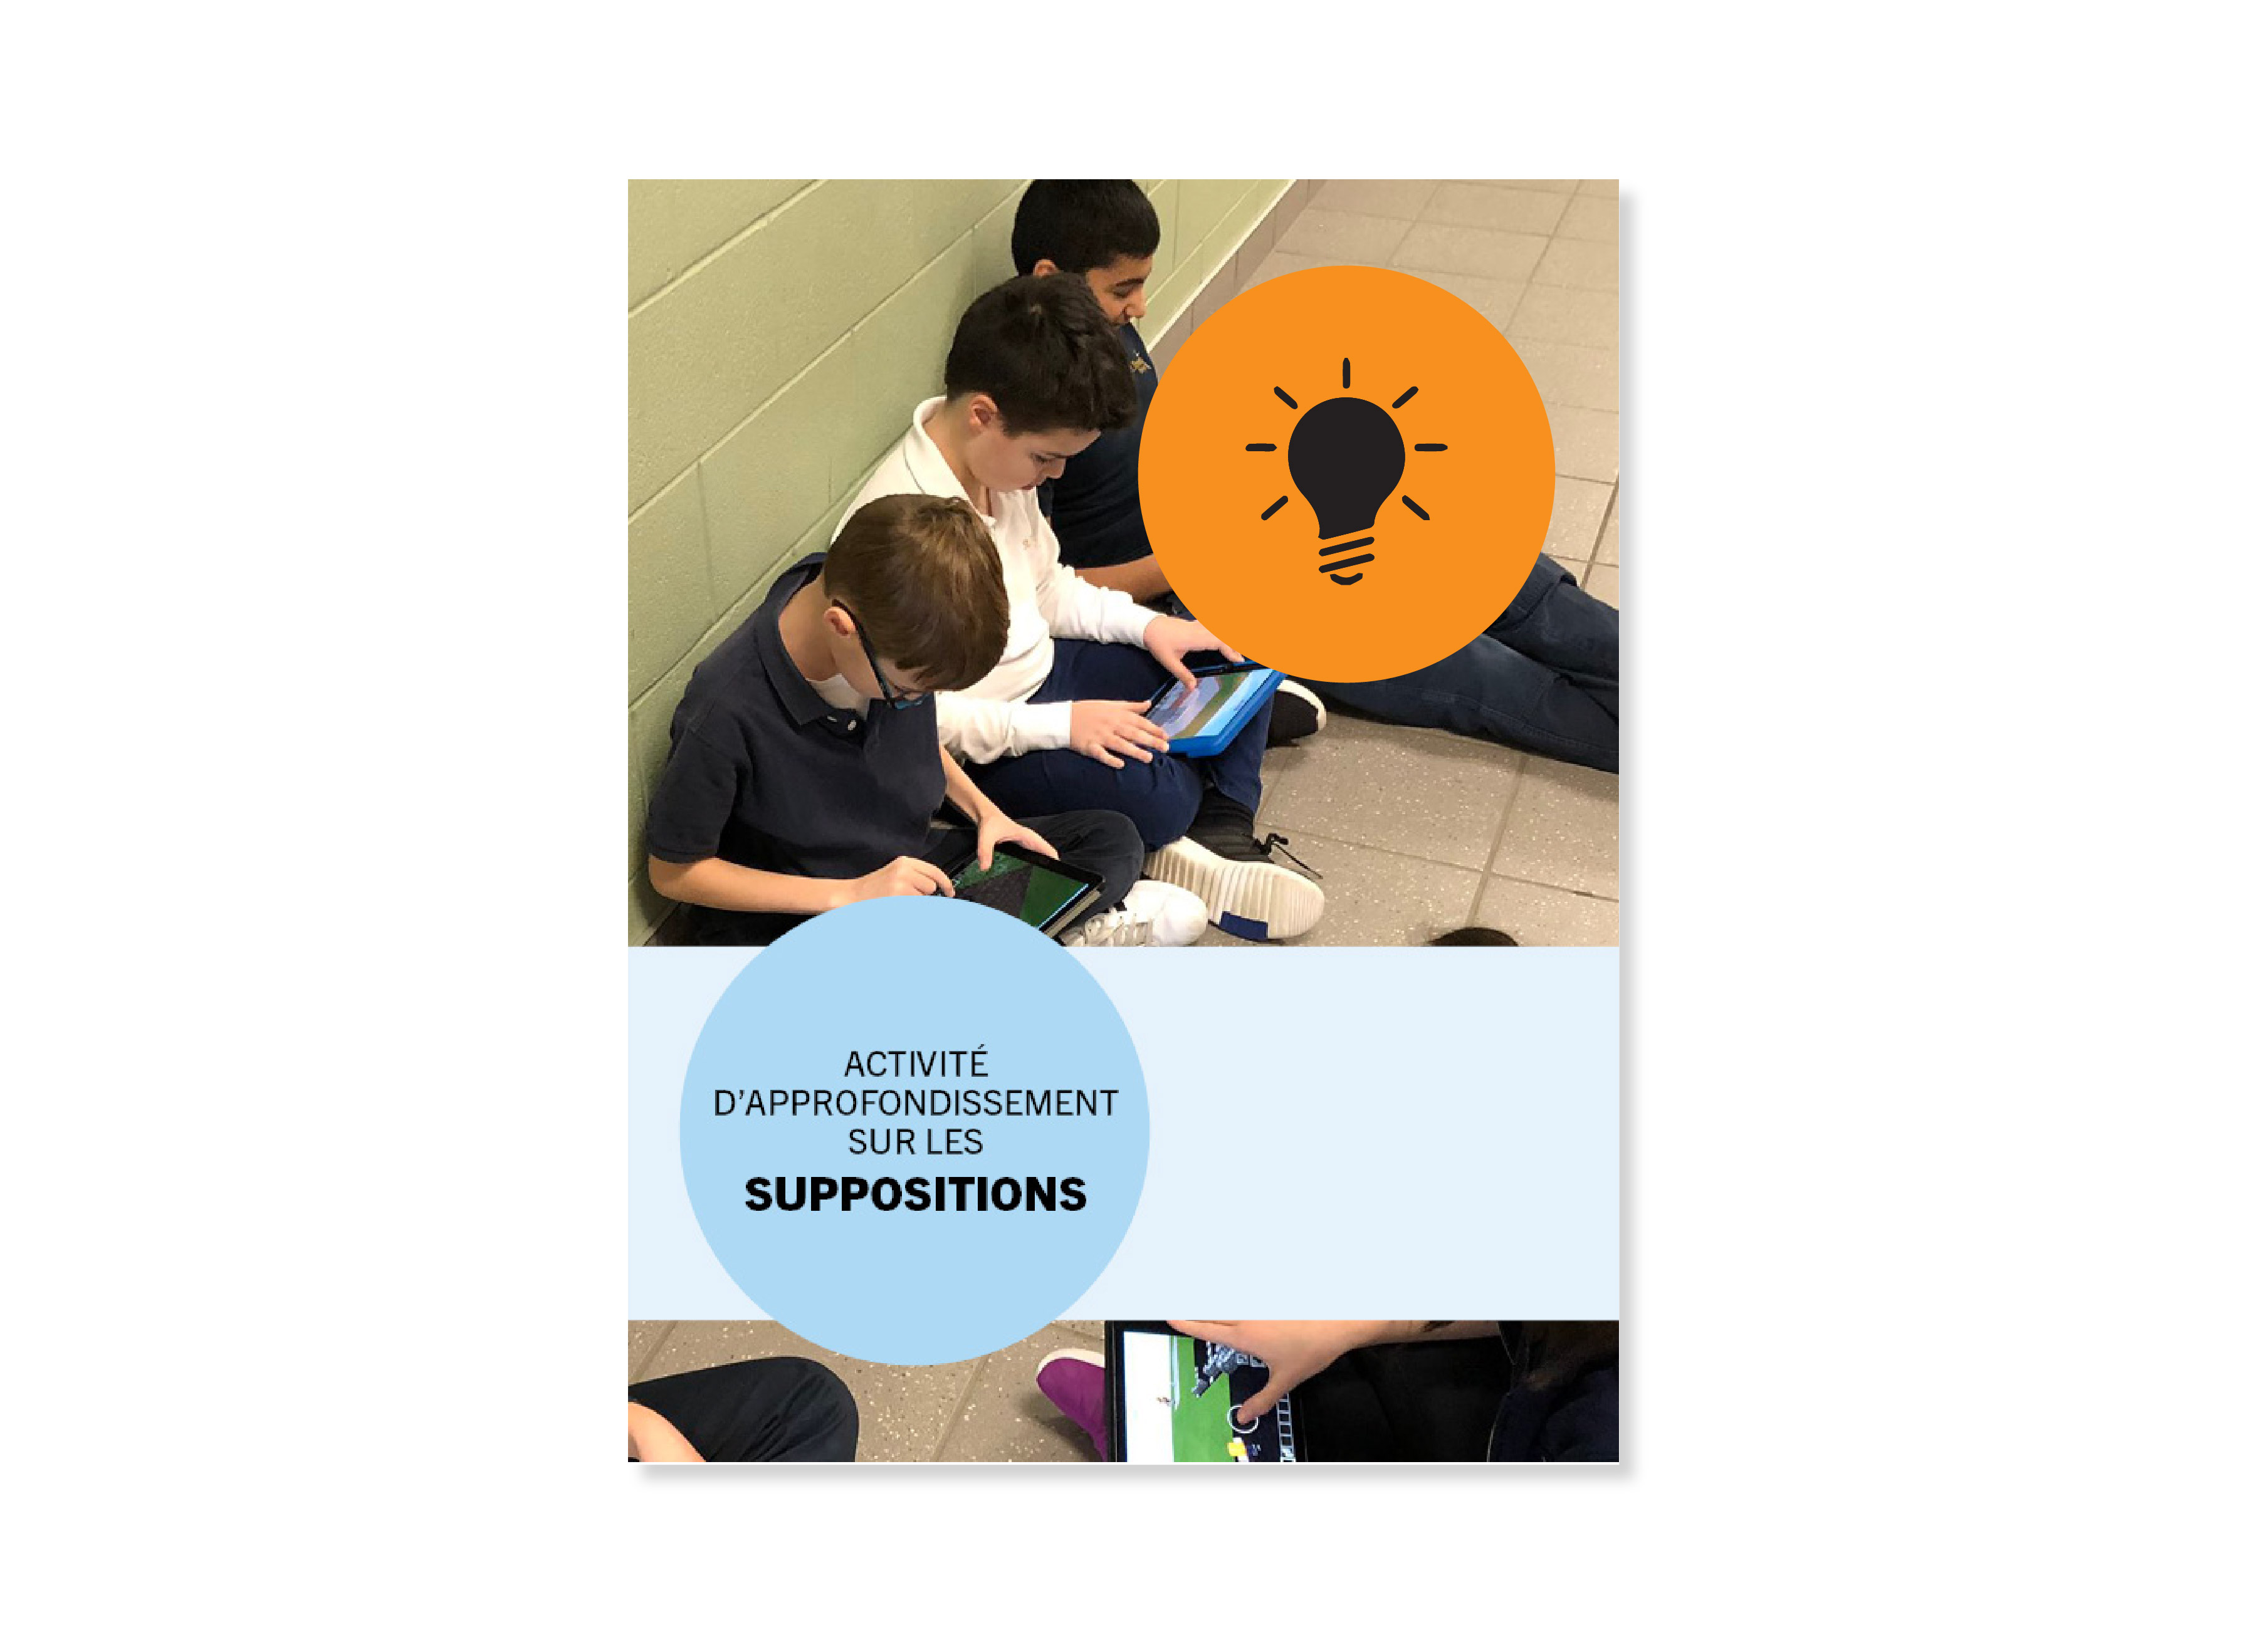 Group of elementary aged students sitting in a school hallway, looking down working on their tablets. Title text says "Activité d’approfondissement sur les suppositions"